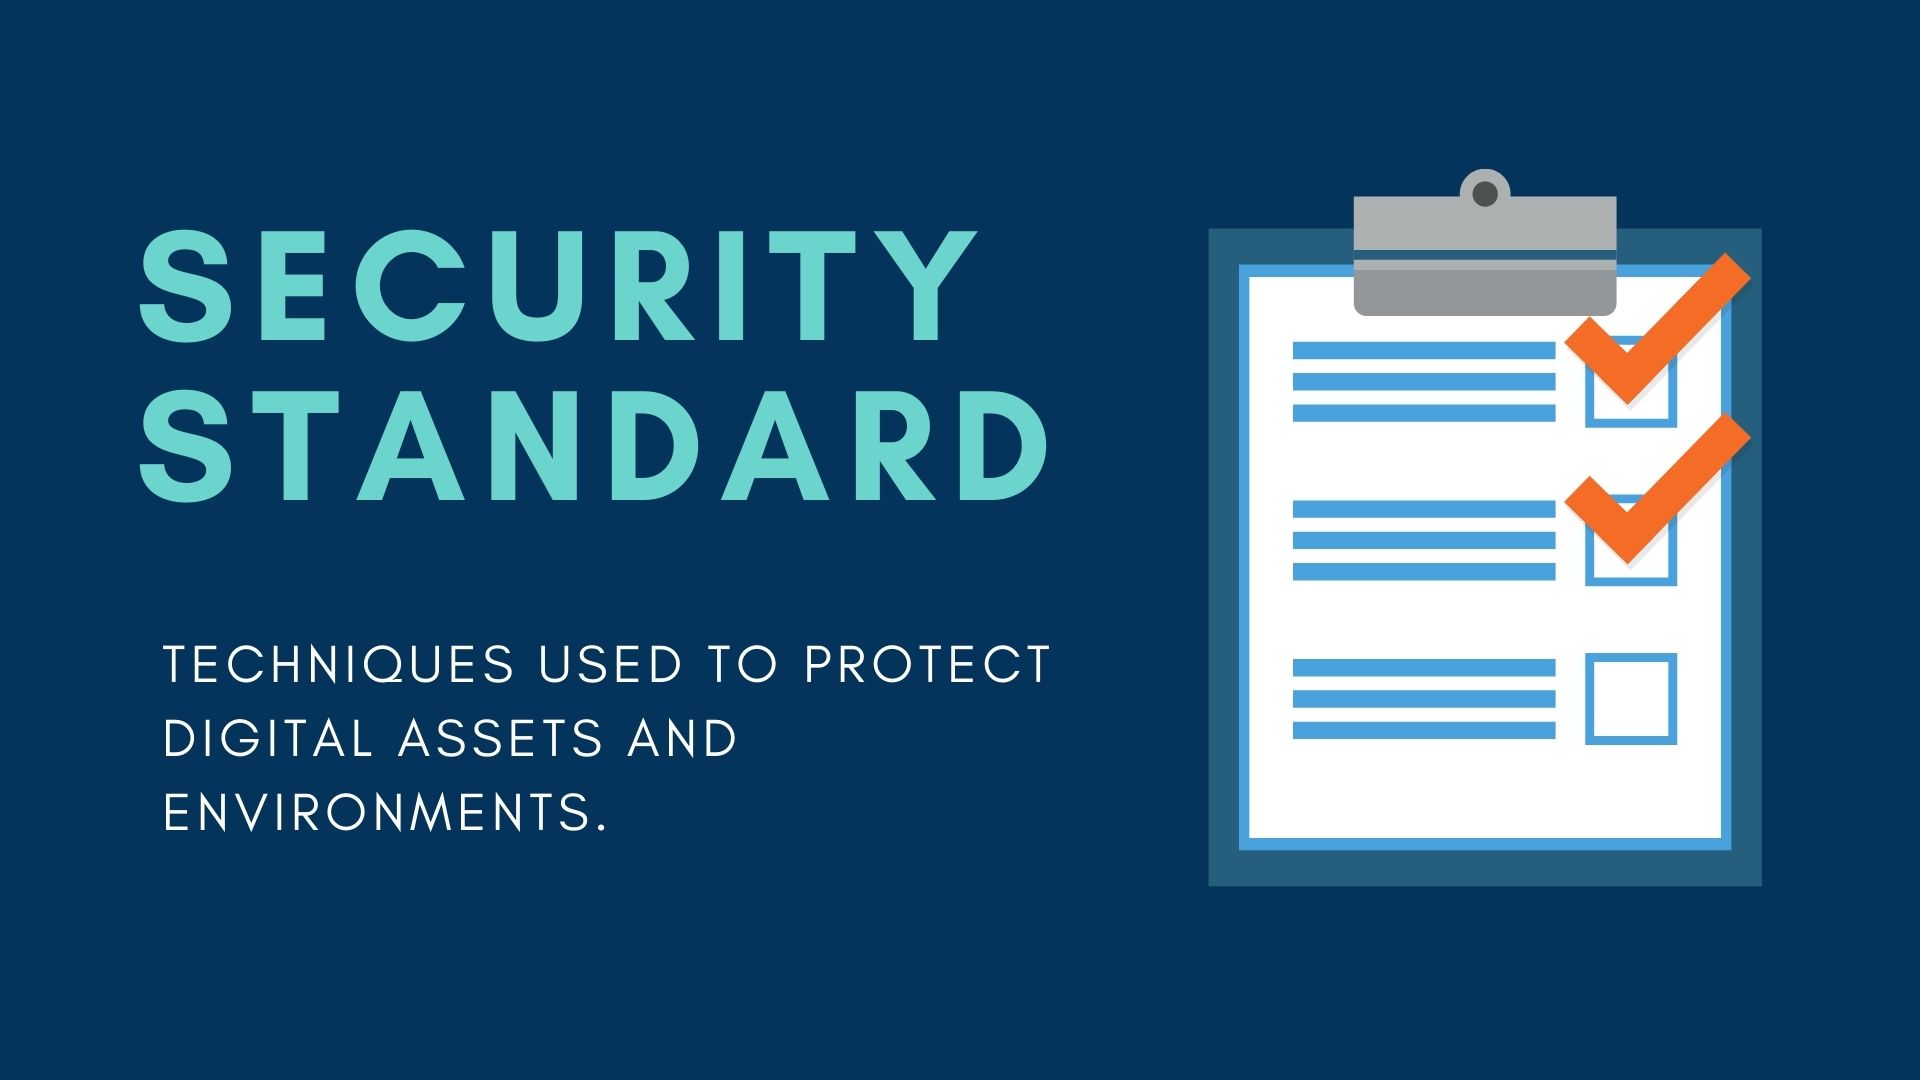 Security standard: Techniques used to protect digital assets and environments.